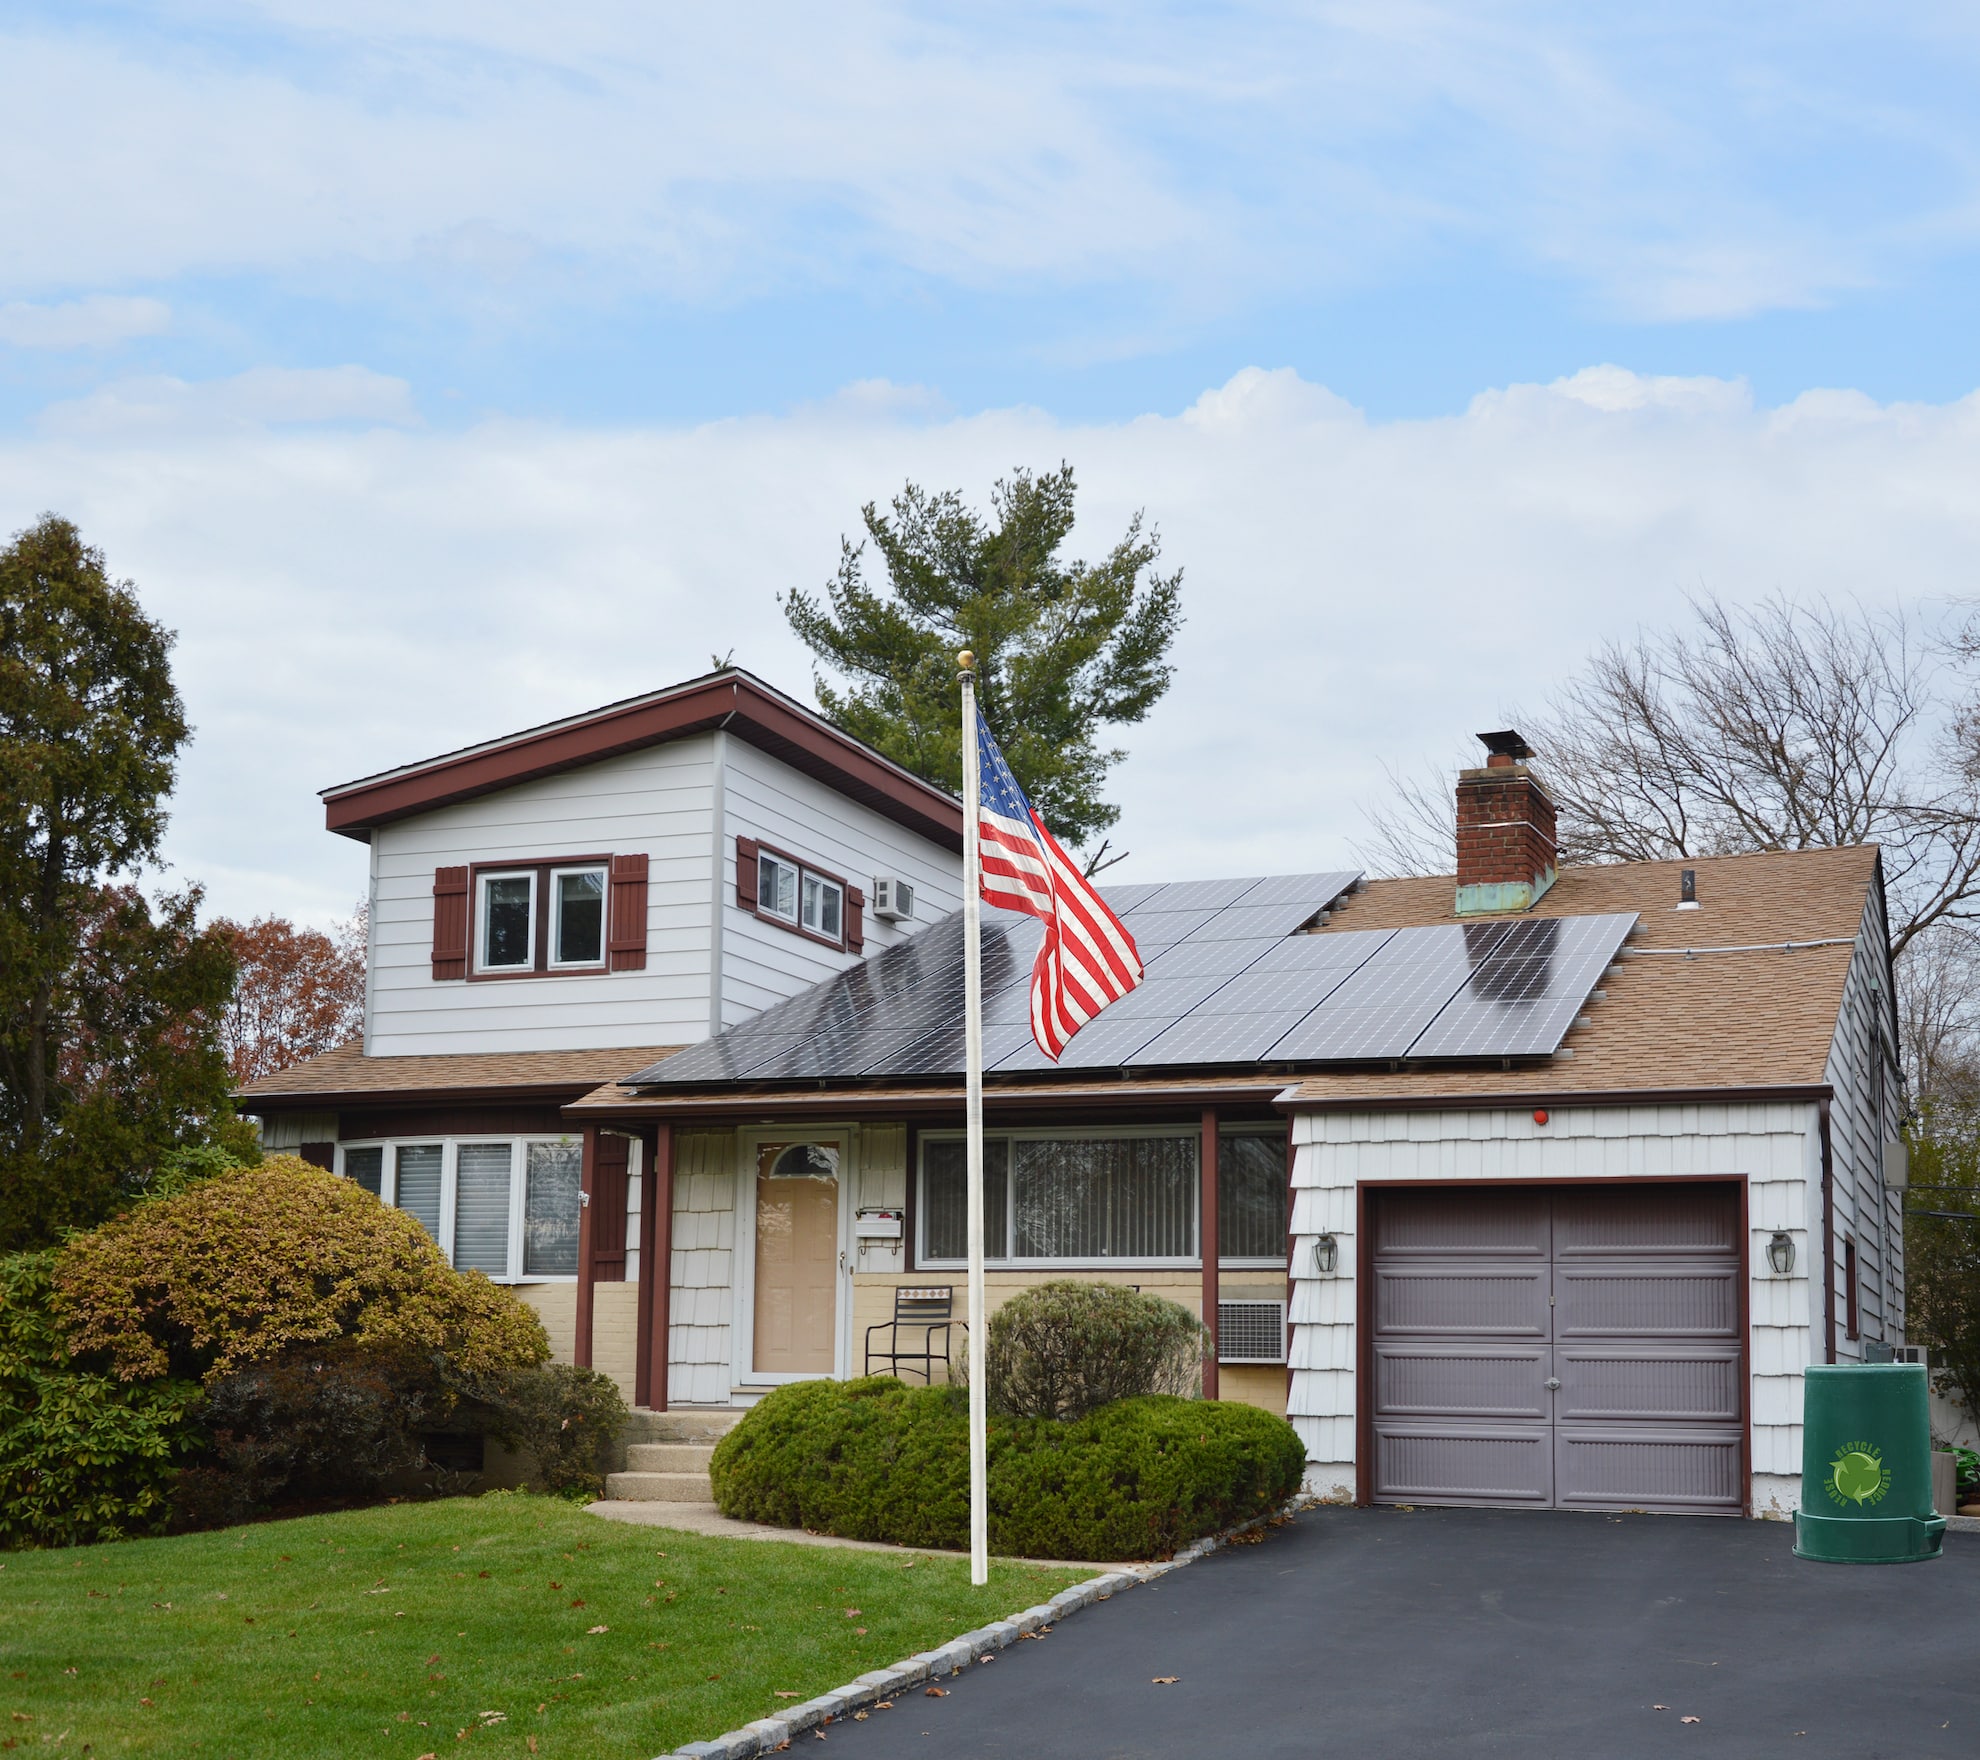 american flag pole suburban ranch style home with solar panel on roof